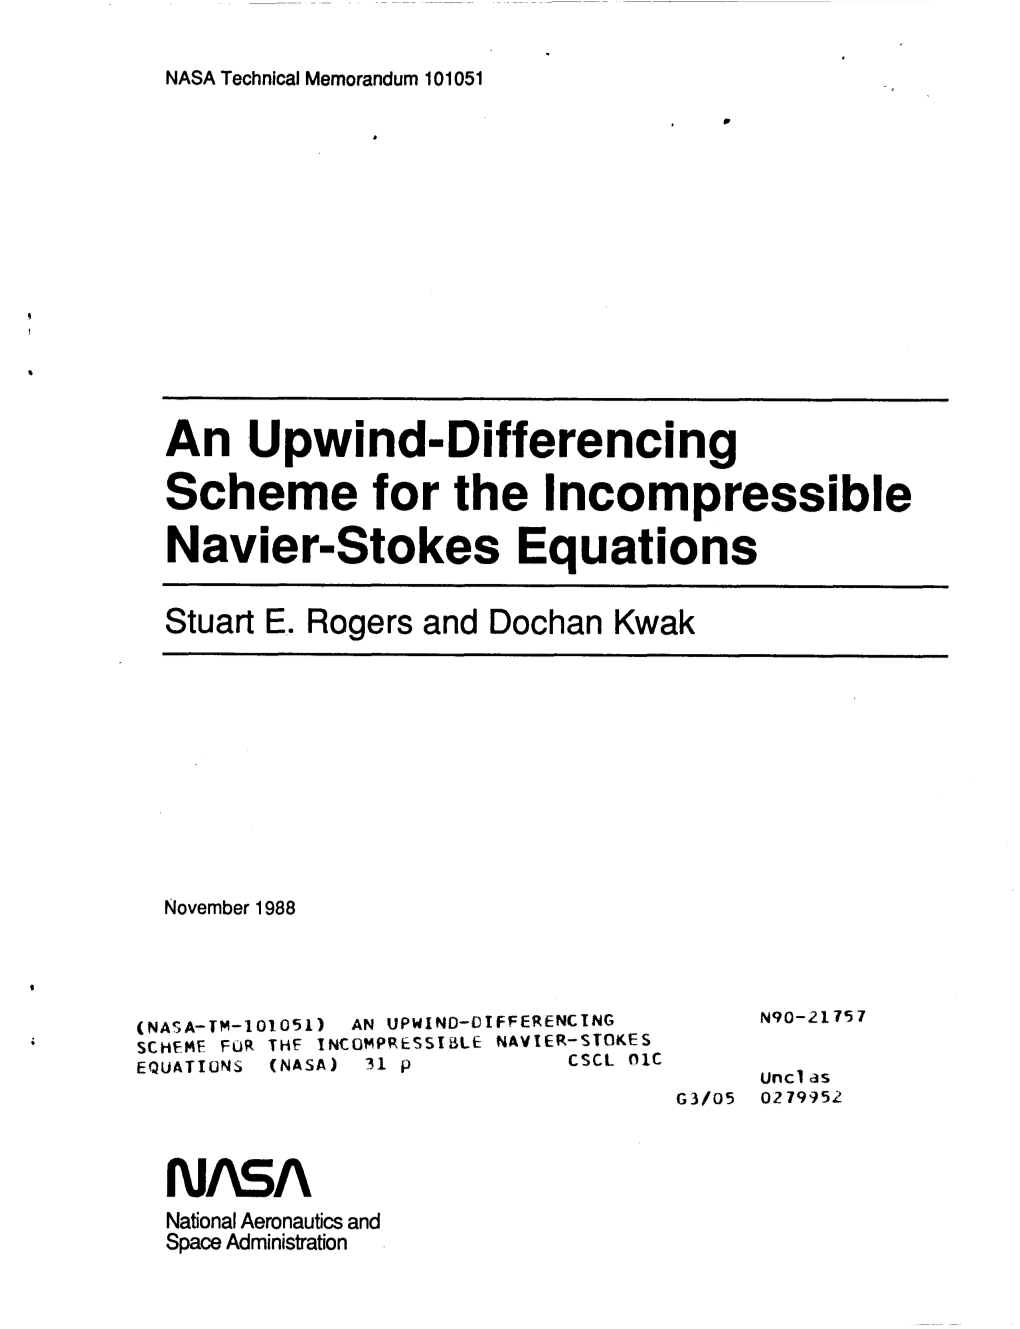 An Upwind-Differencing Scheme for the Incompressible Navier-Sto Kes